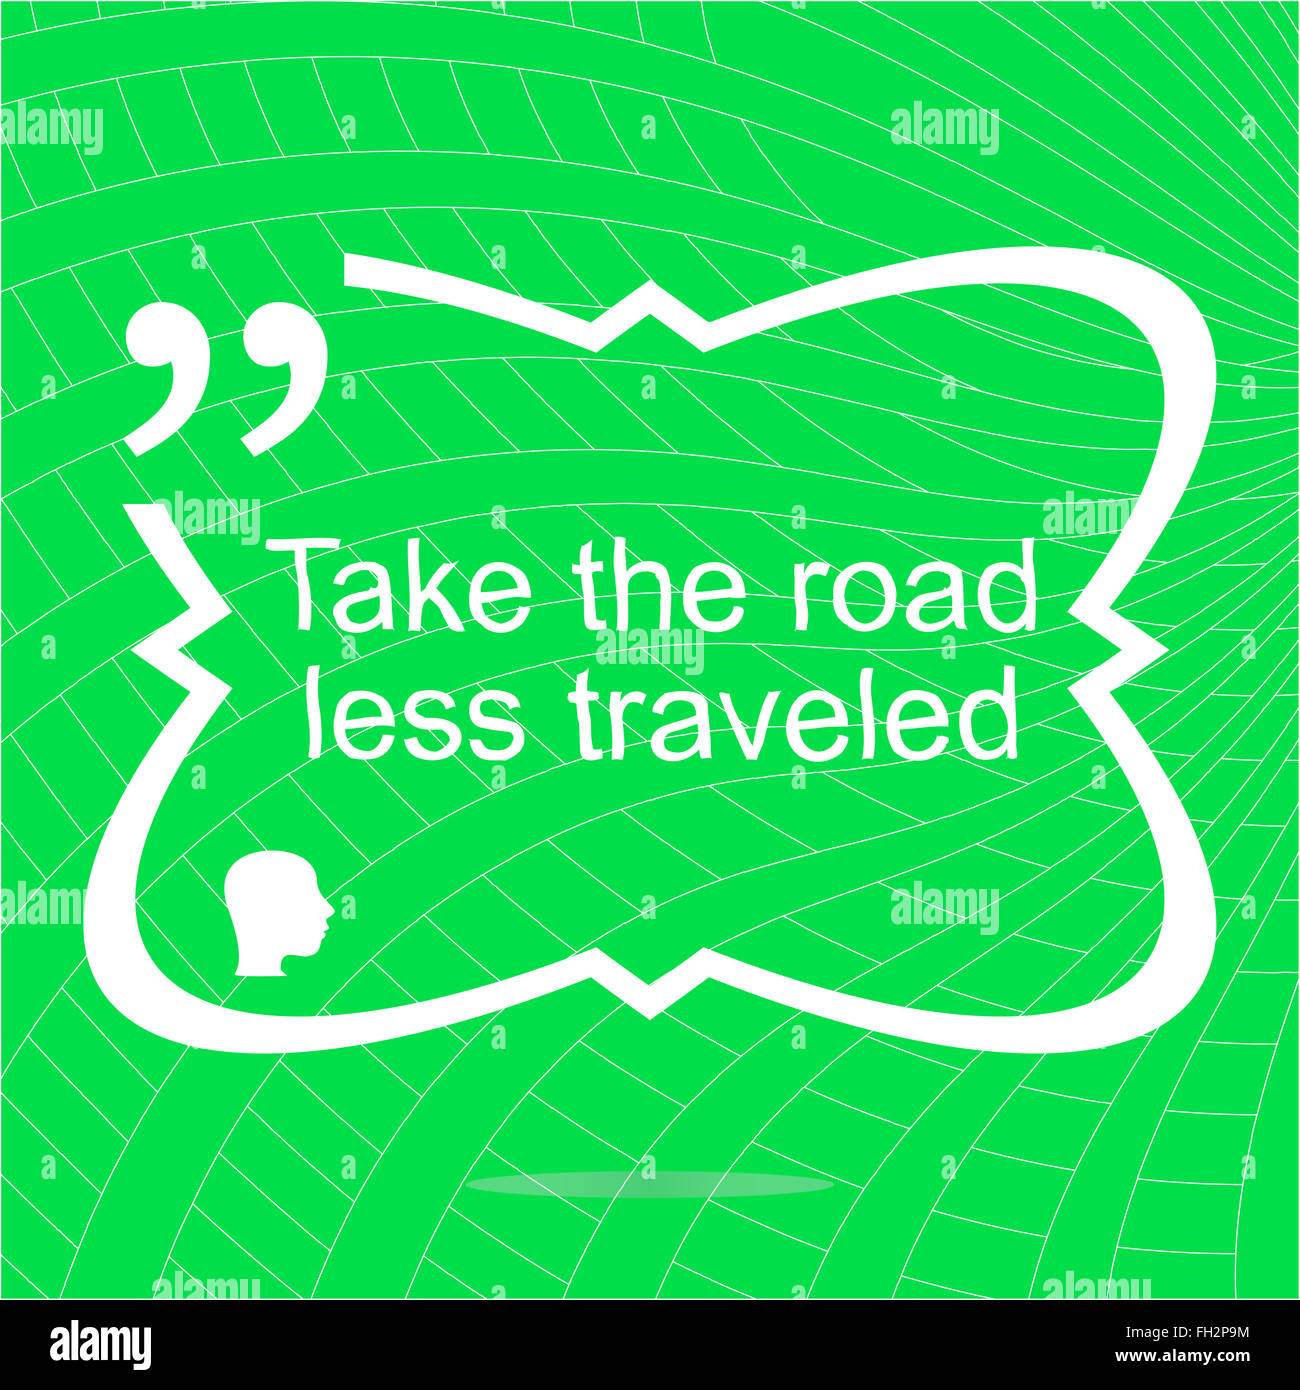 Take the road less traveled. Inspirational motivational quote. Simple trendy design. Positive quote Stock Photo